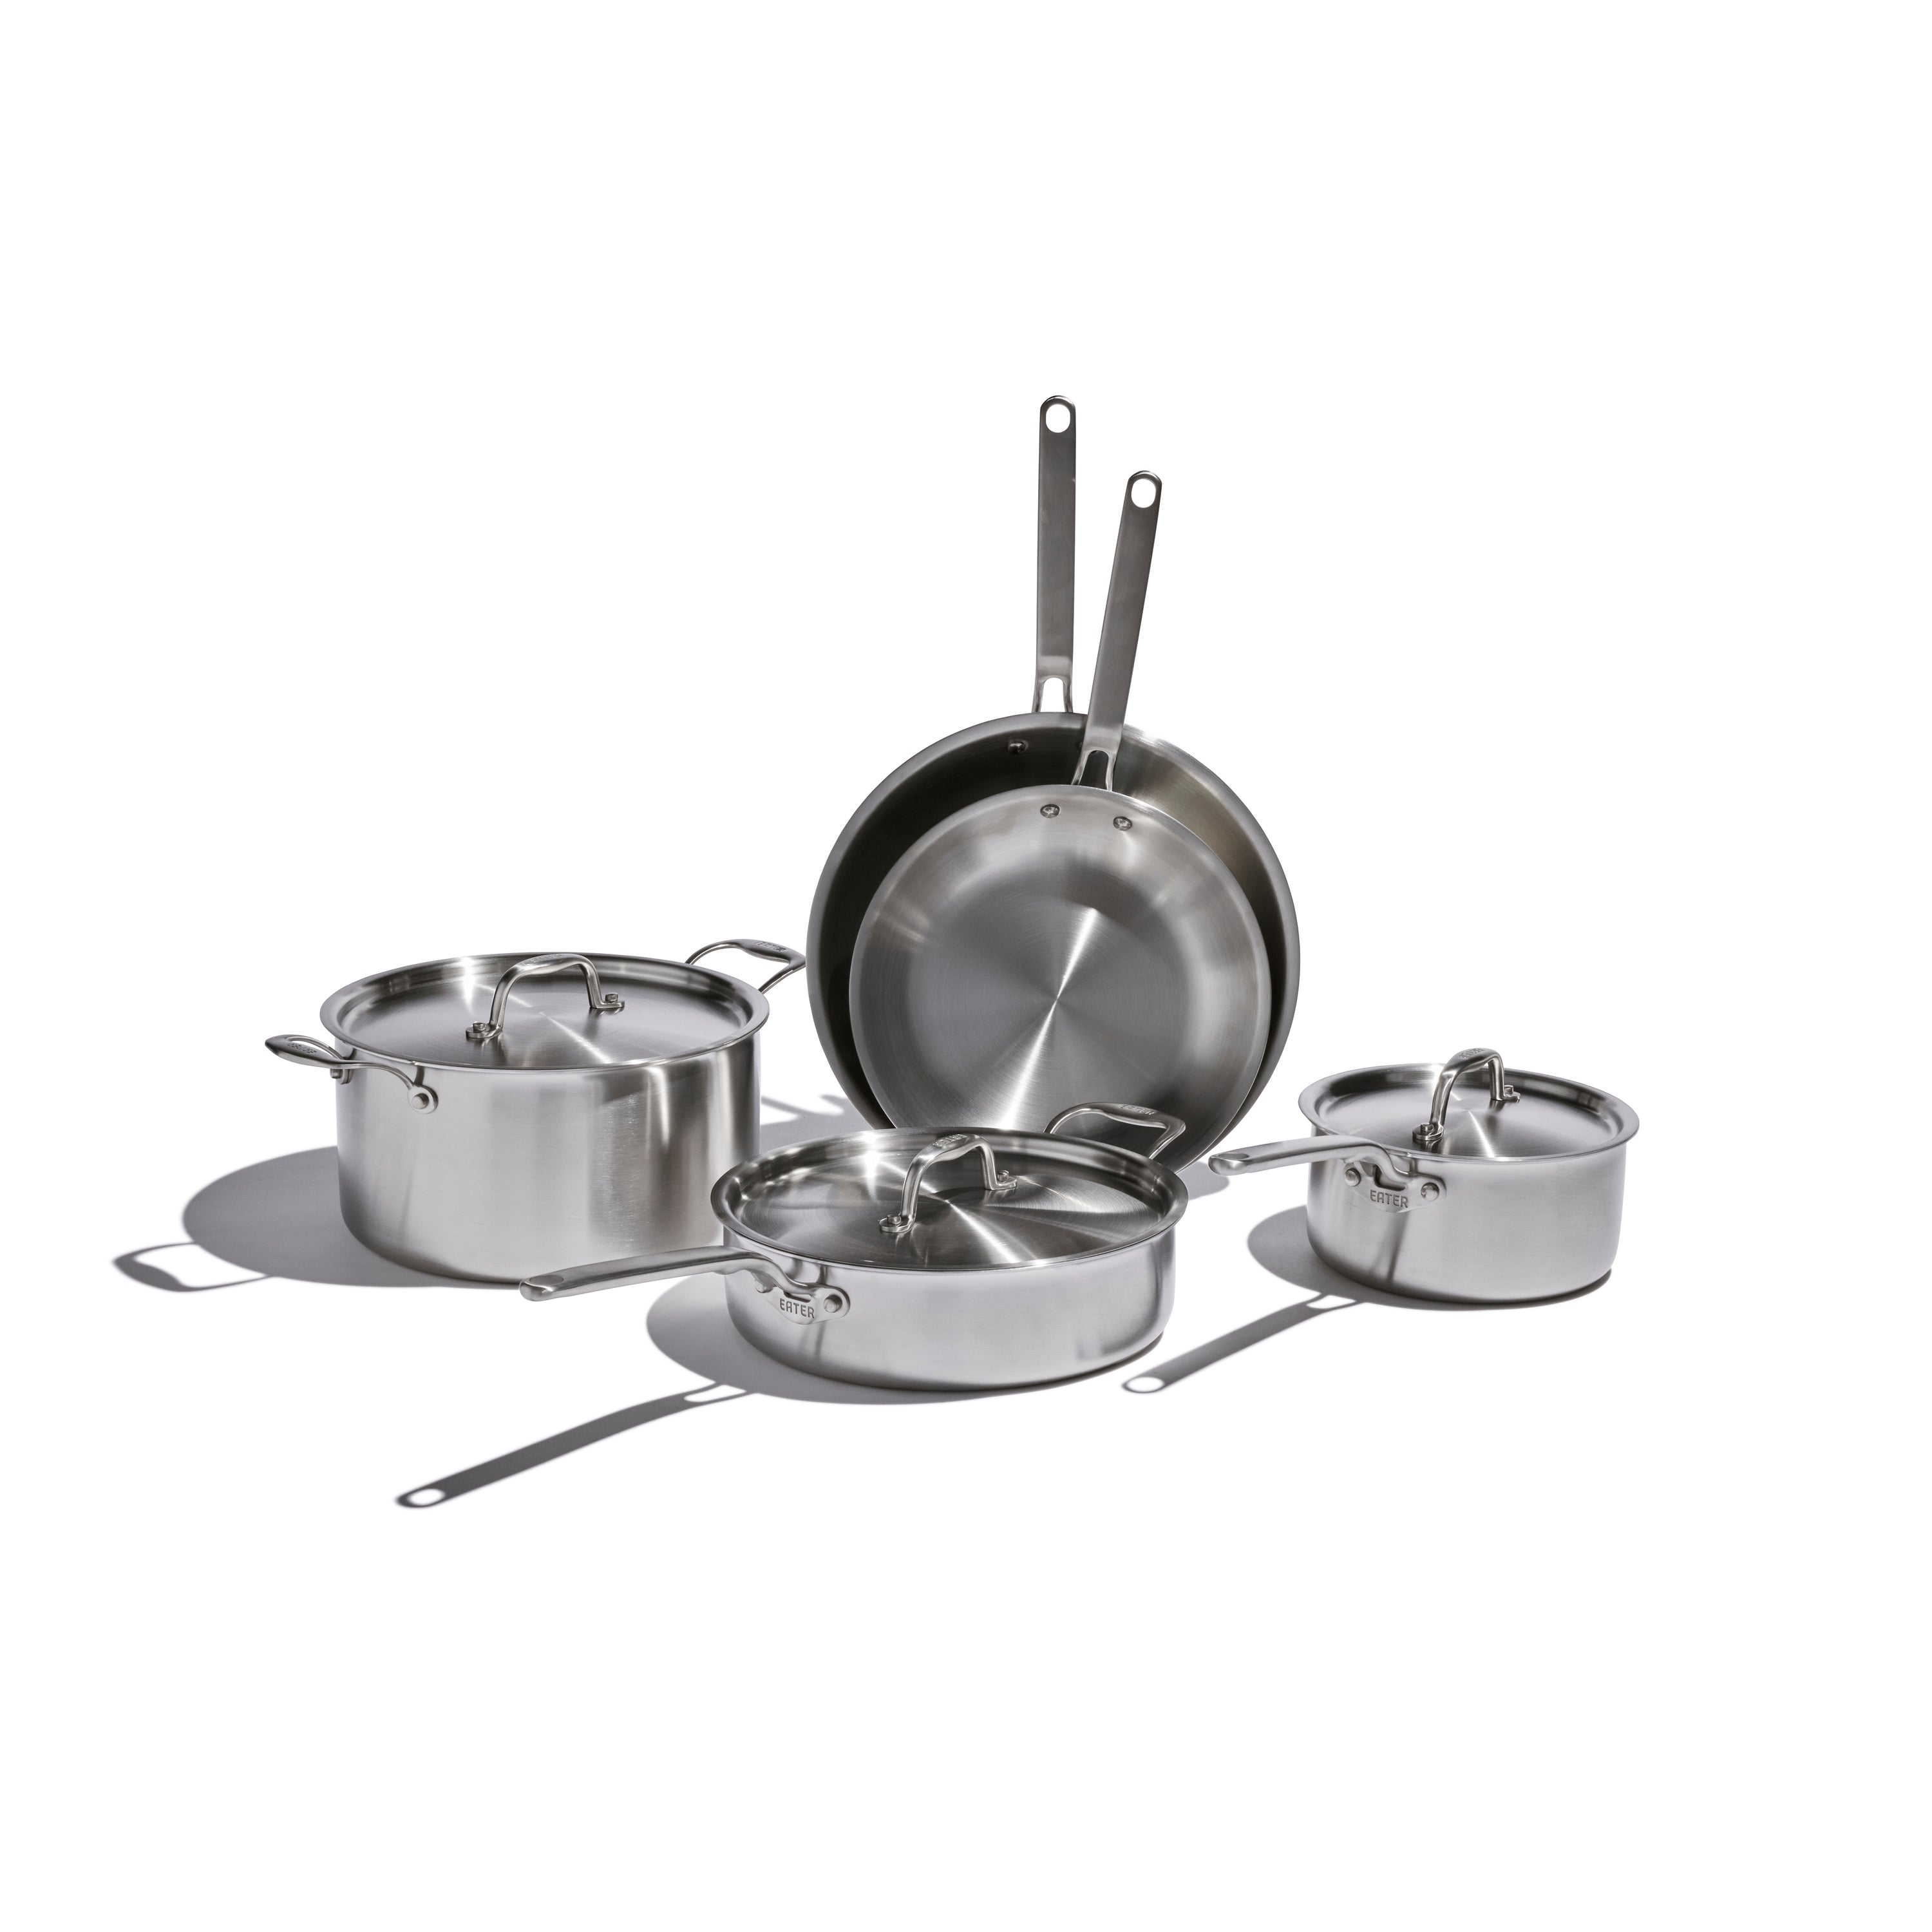 Meyer Corporation 10-Piece 5-Ply Clad Cookware Set in Stainless Steel